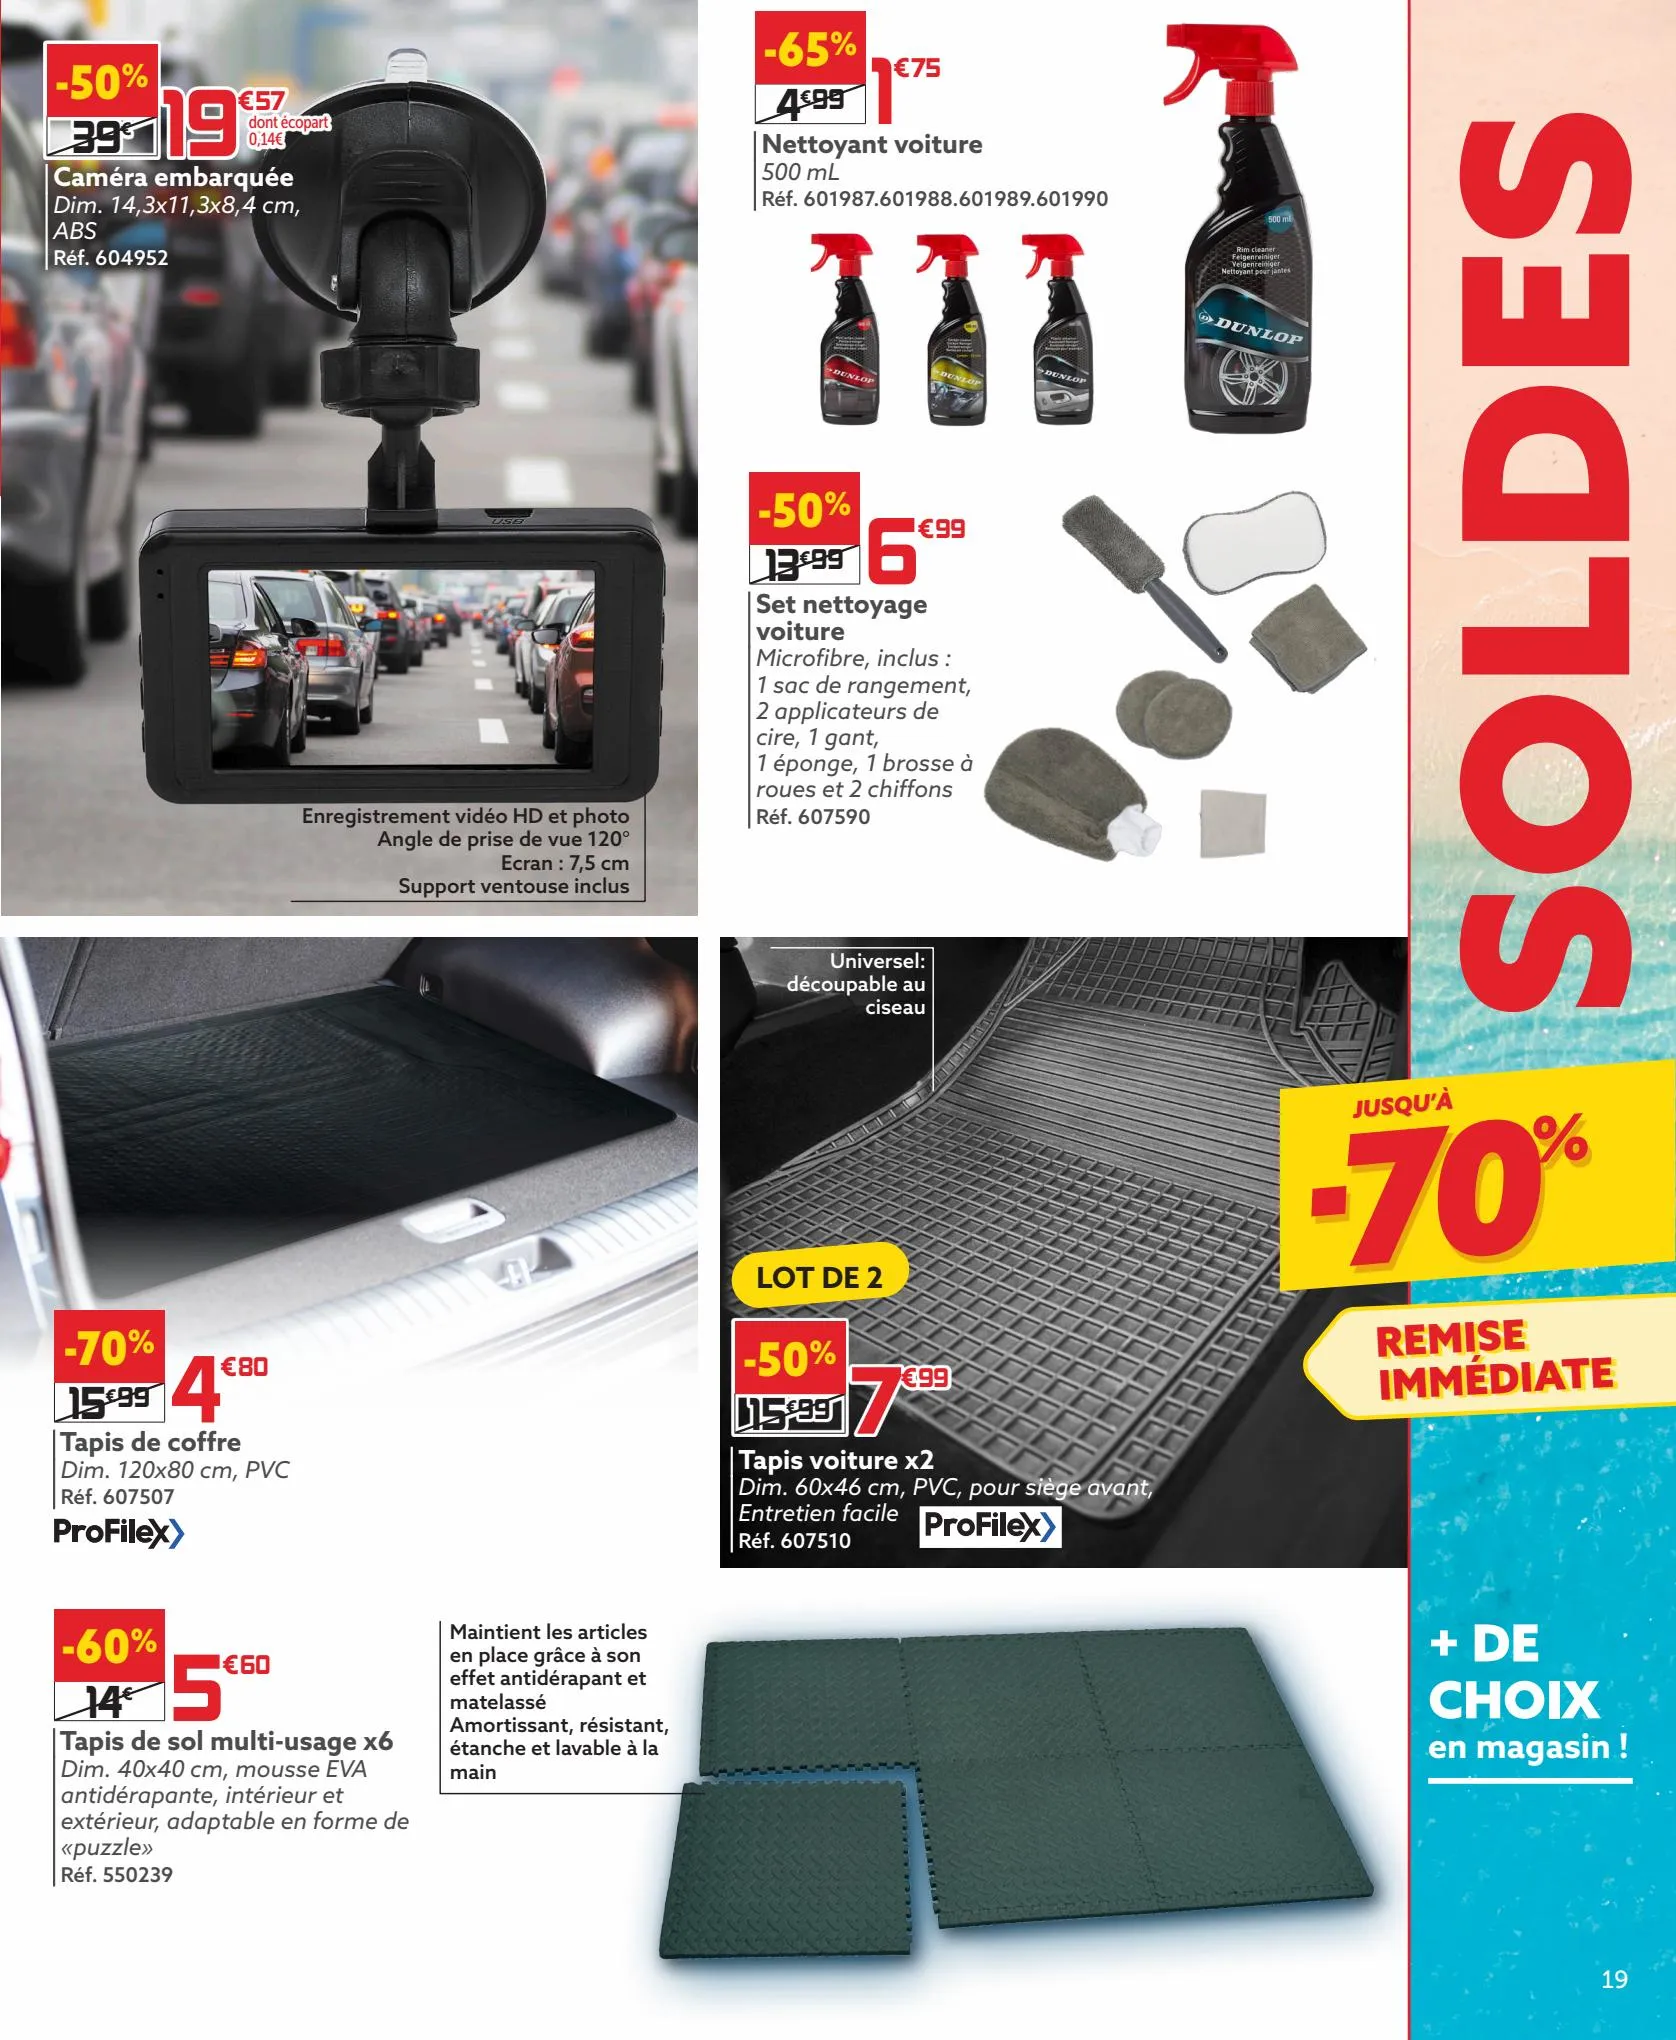 Catalogue Soldes, page 00019